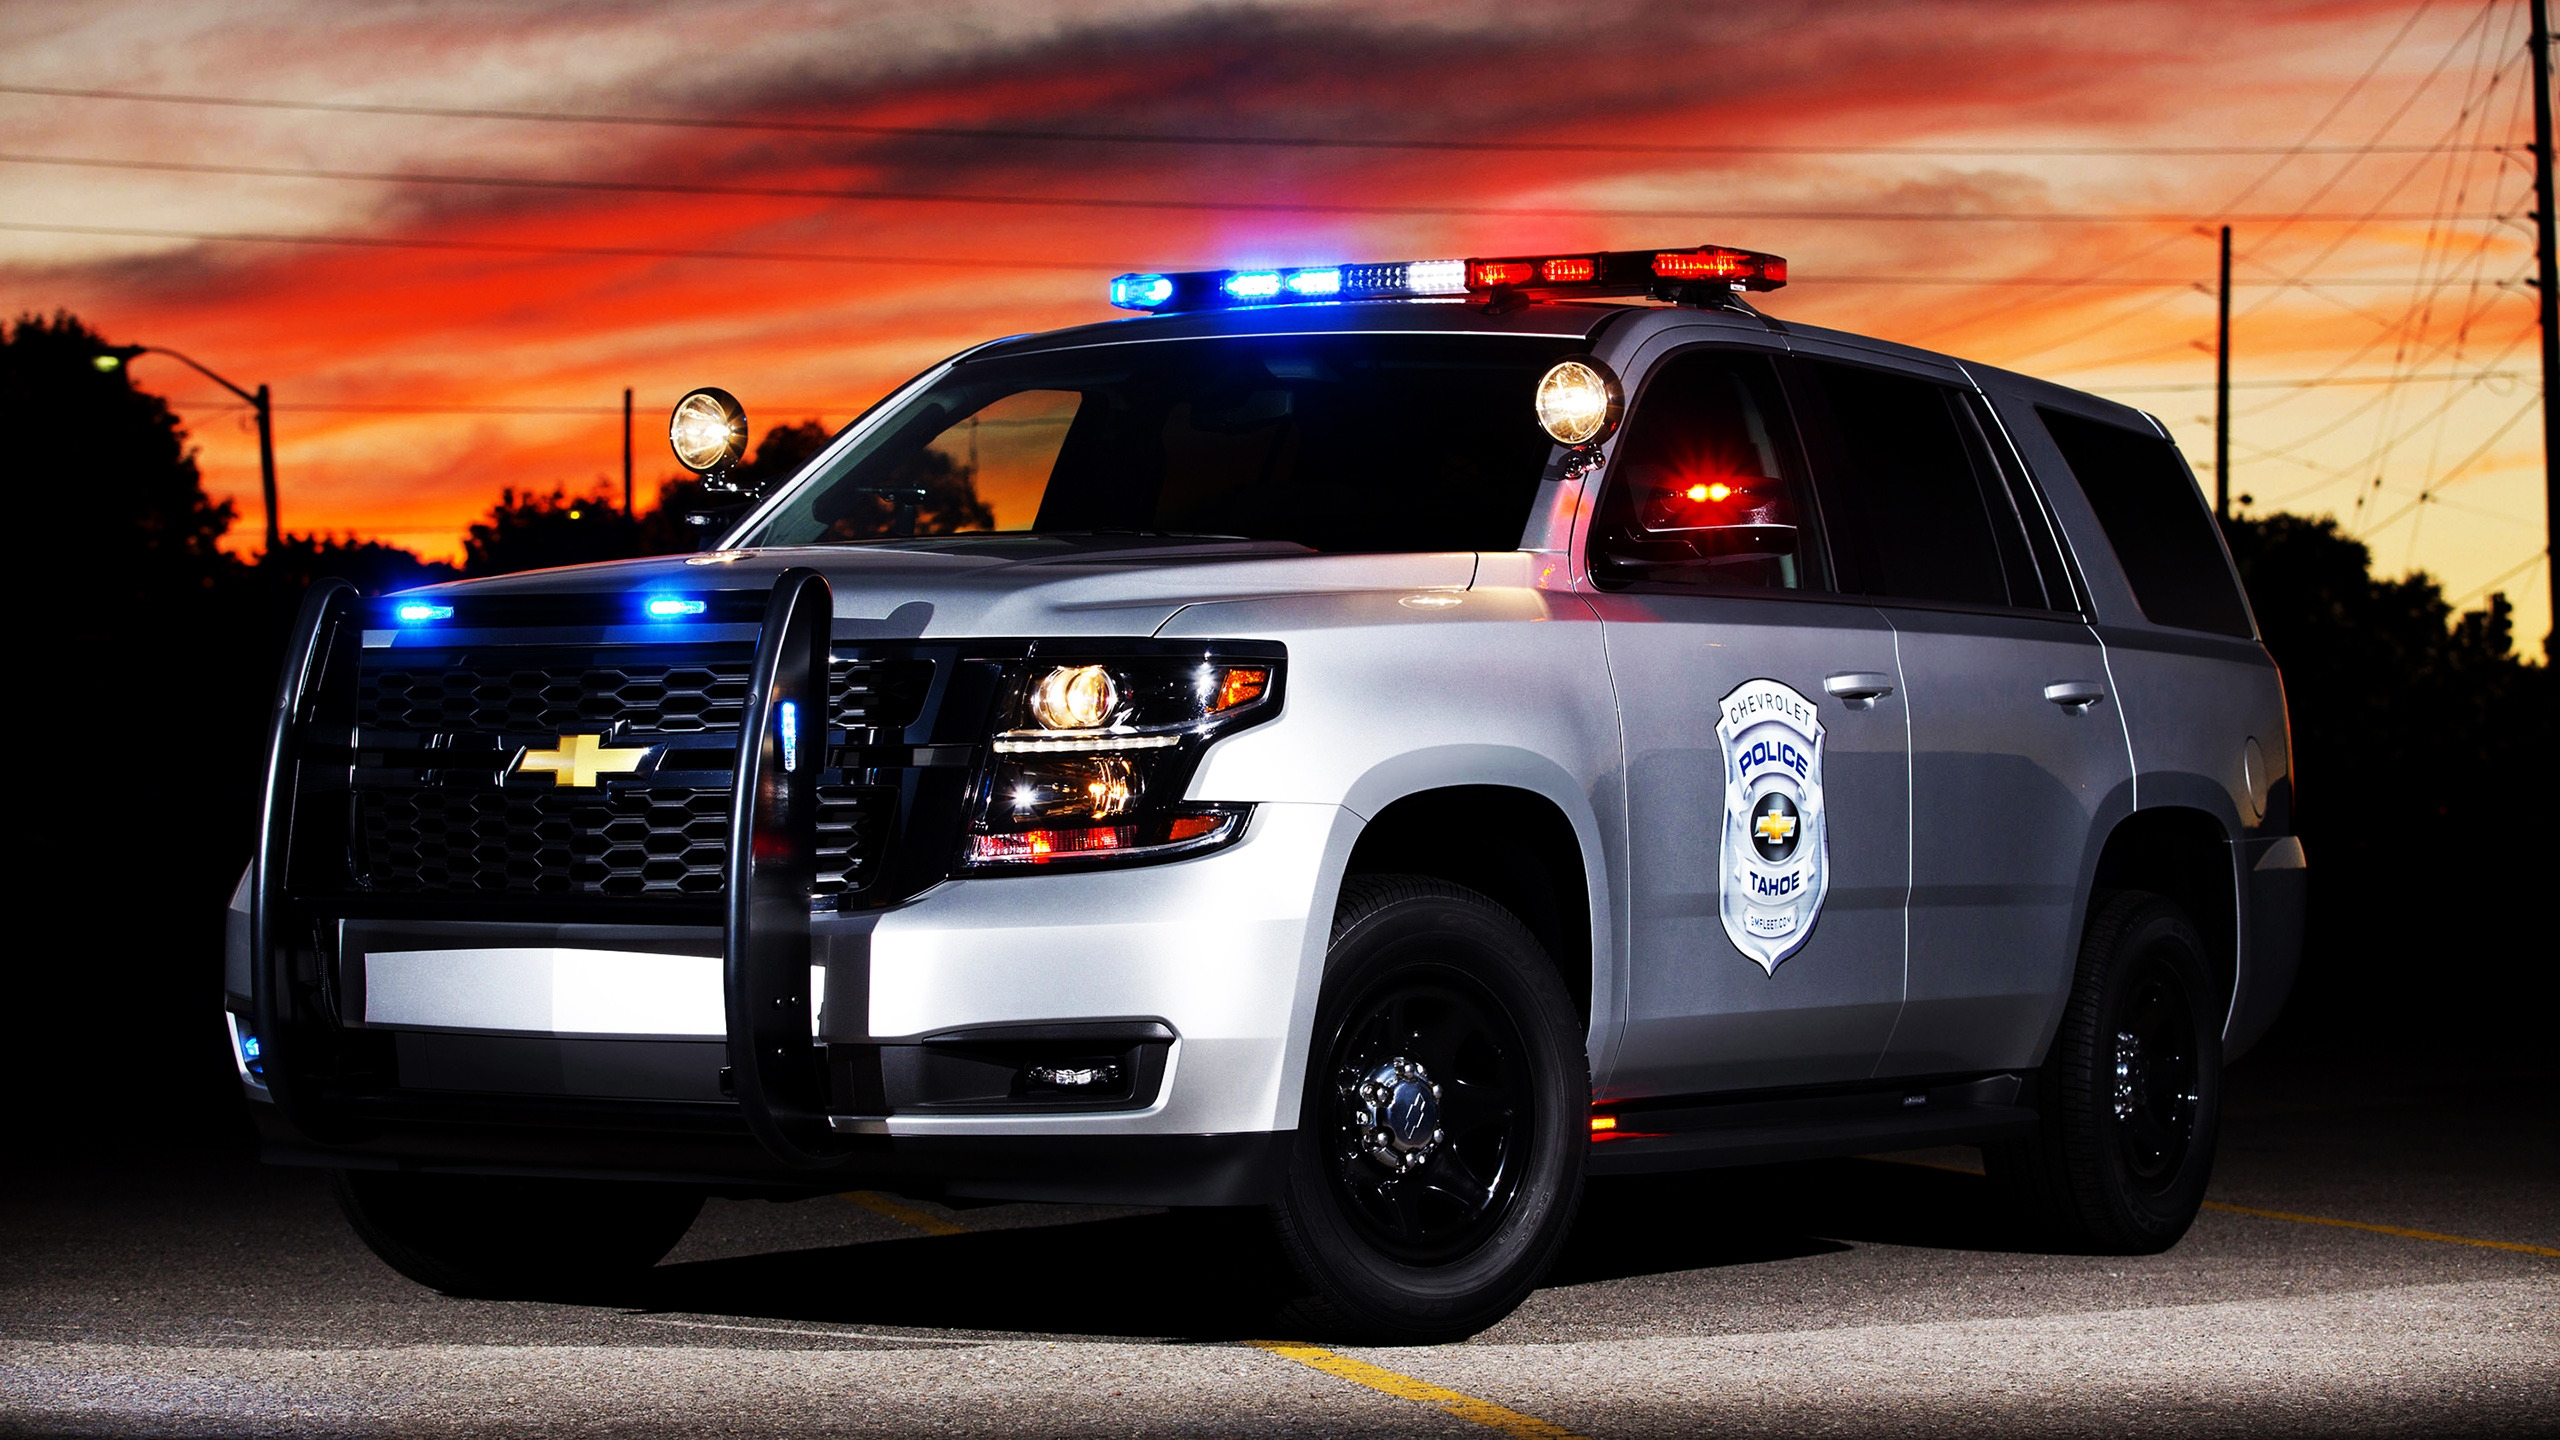 2015 Chevrolet Tahoe Police Concept for 2560x1440 HDTV resolution